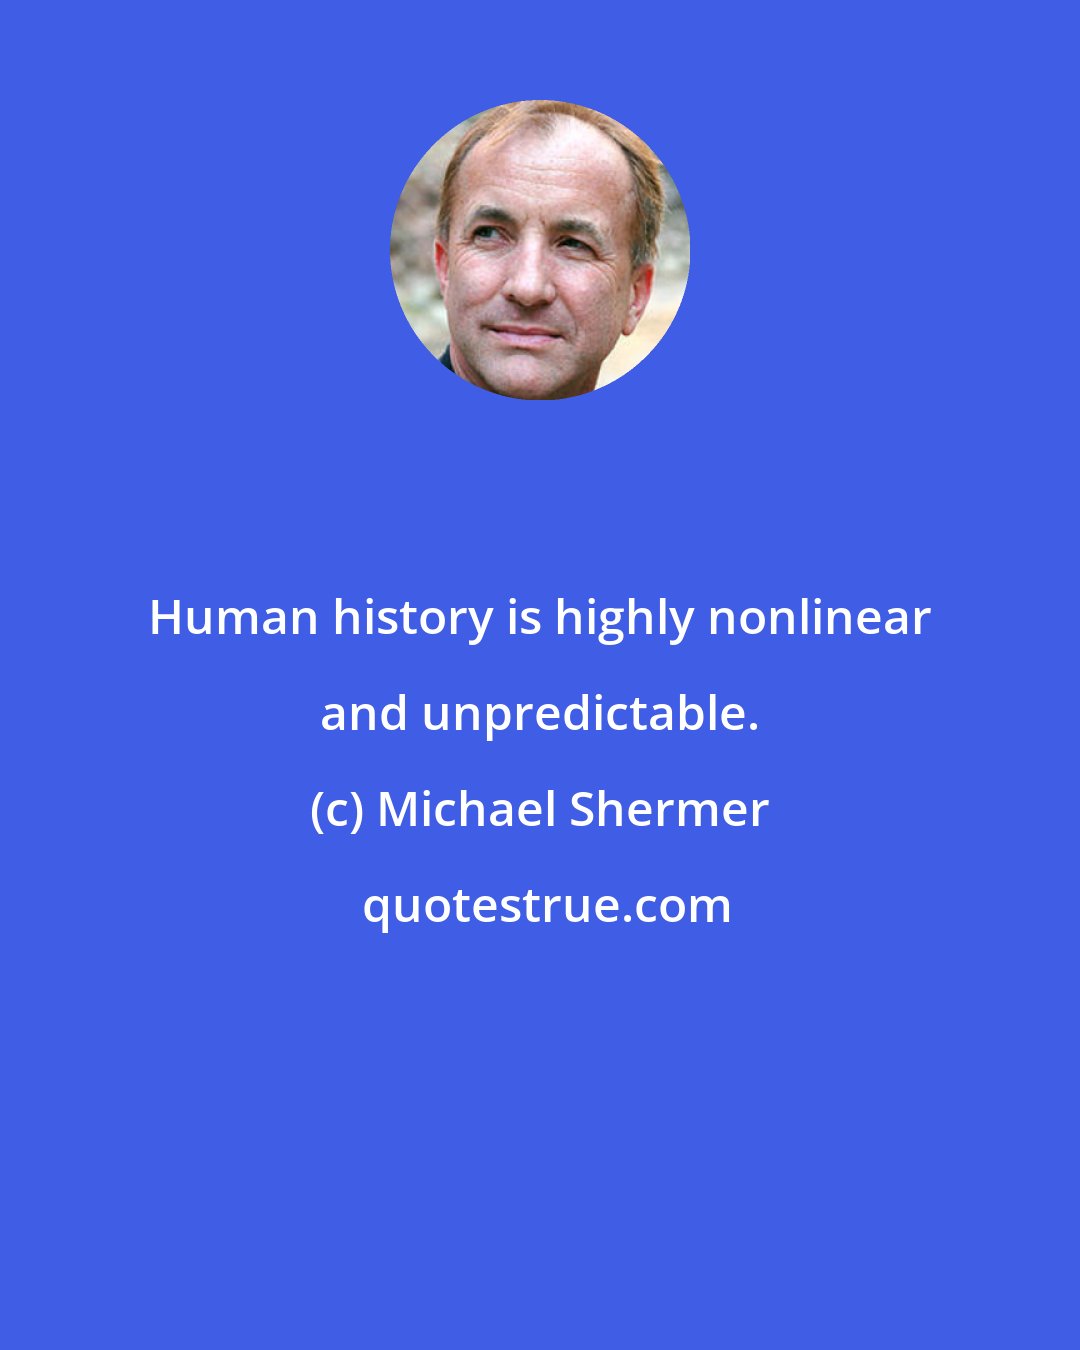 Michael Shermer: Human history is highly nonlinear and unpredictable.